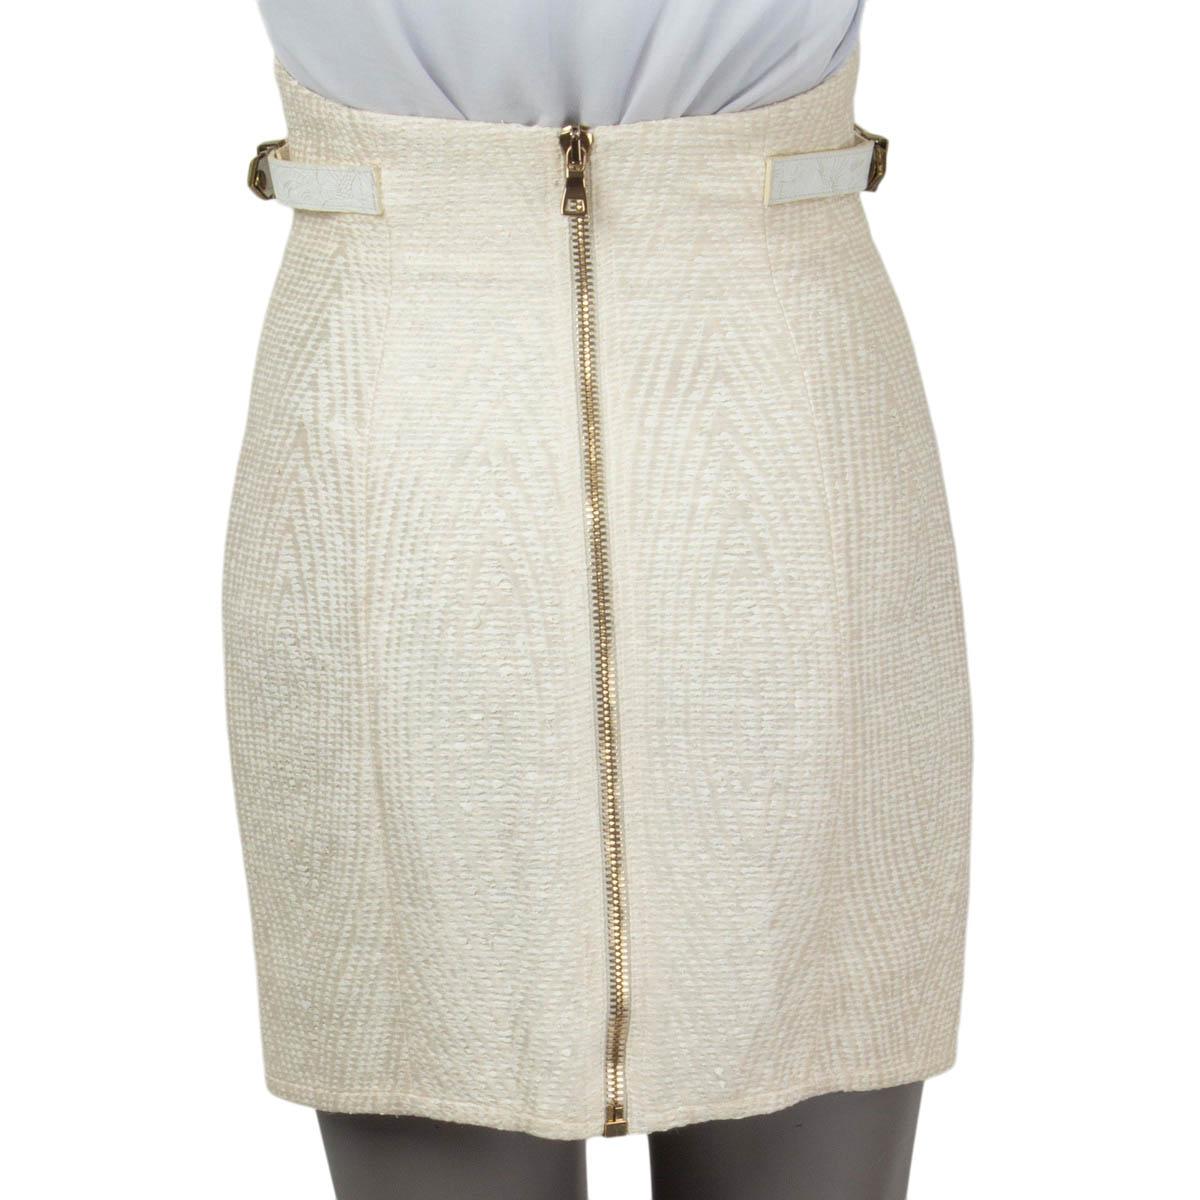 Beige BALMAIN ivory & beige cotton blend BELTED HIGH WAISTED MINI Skirt 36 XS For Sale